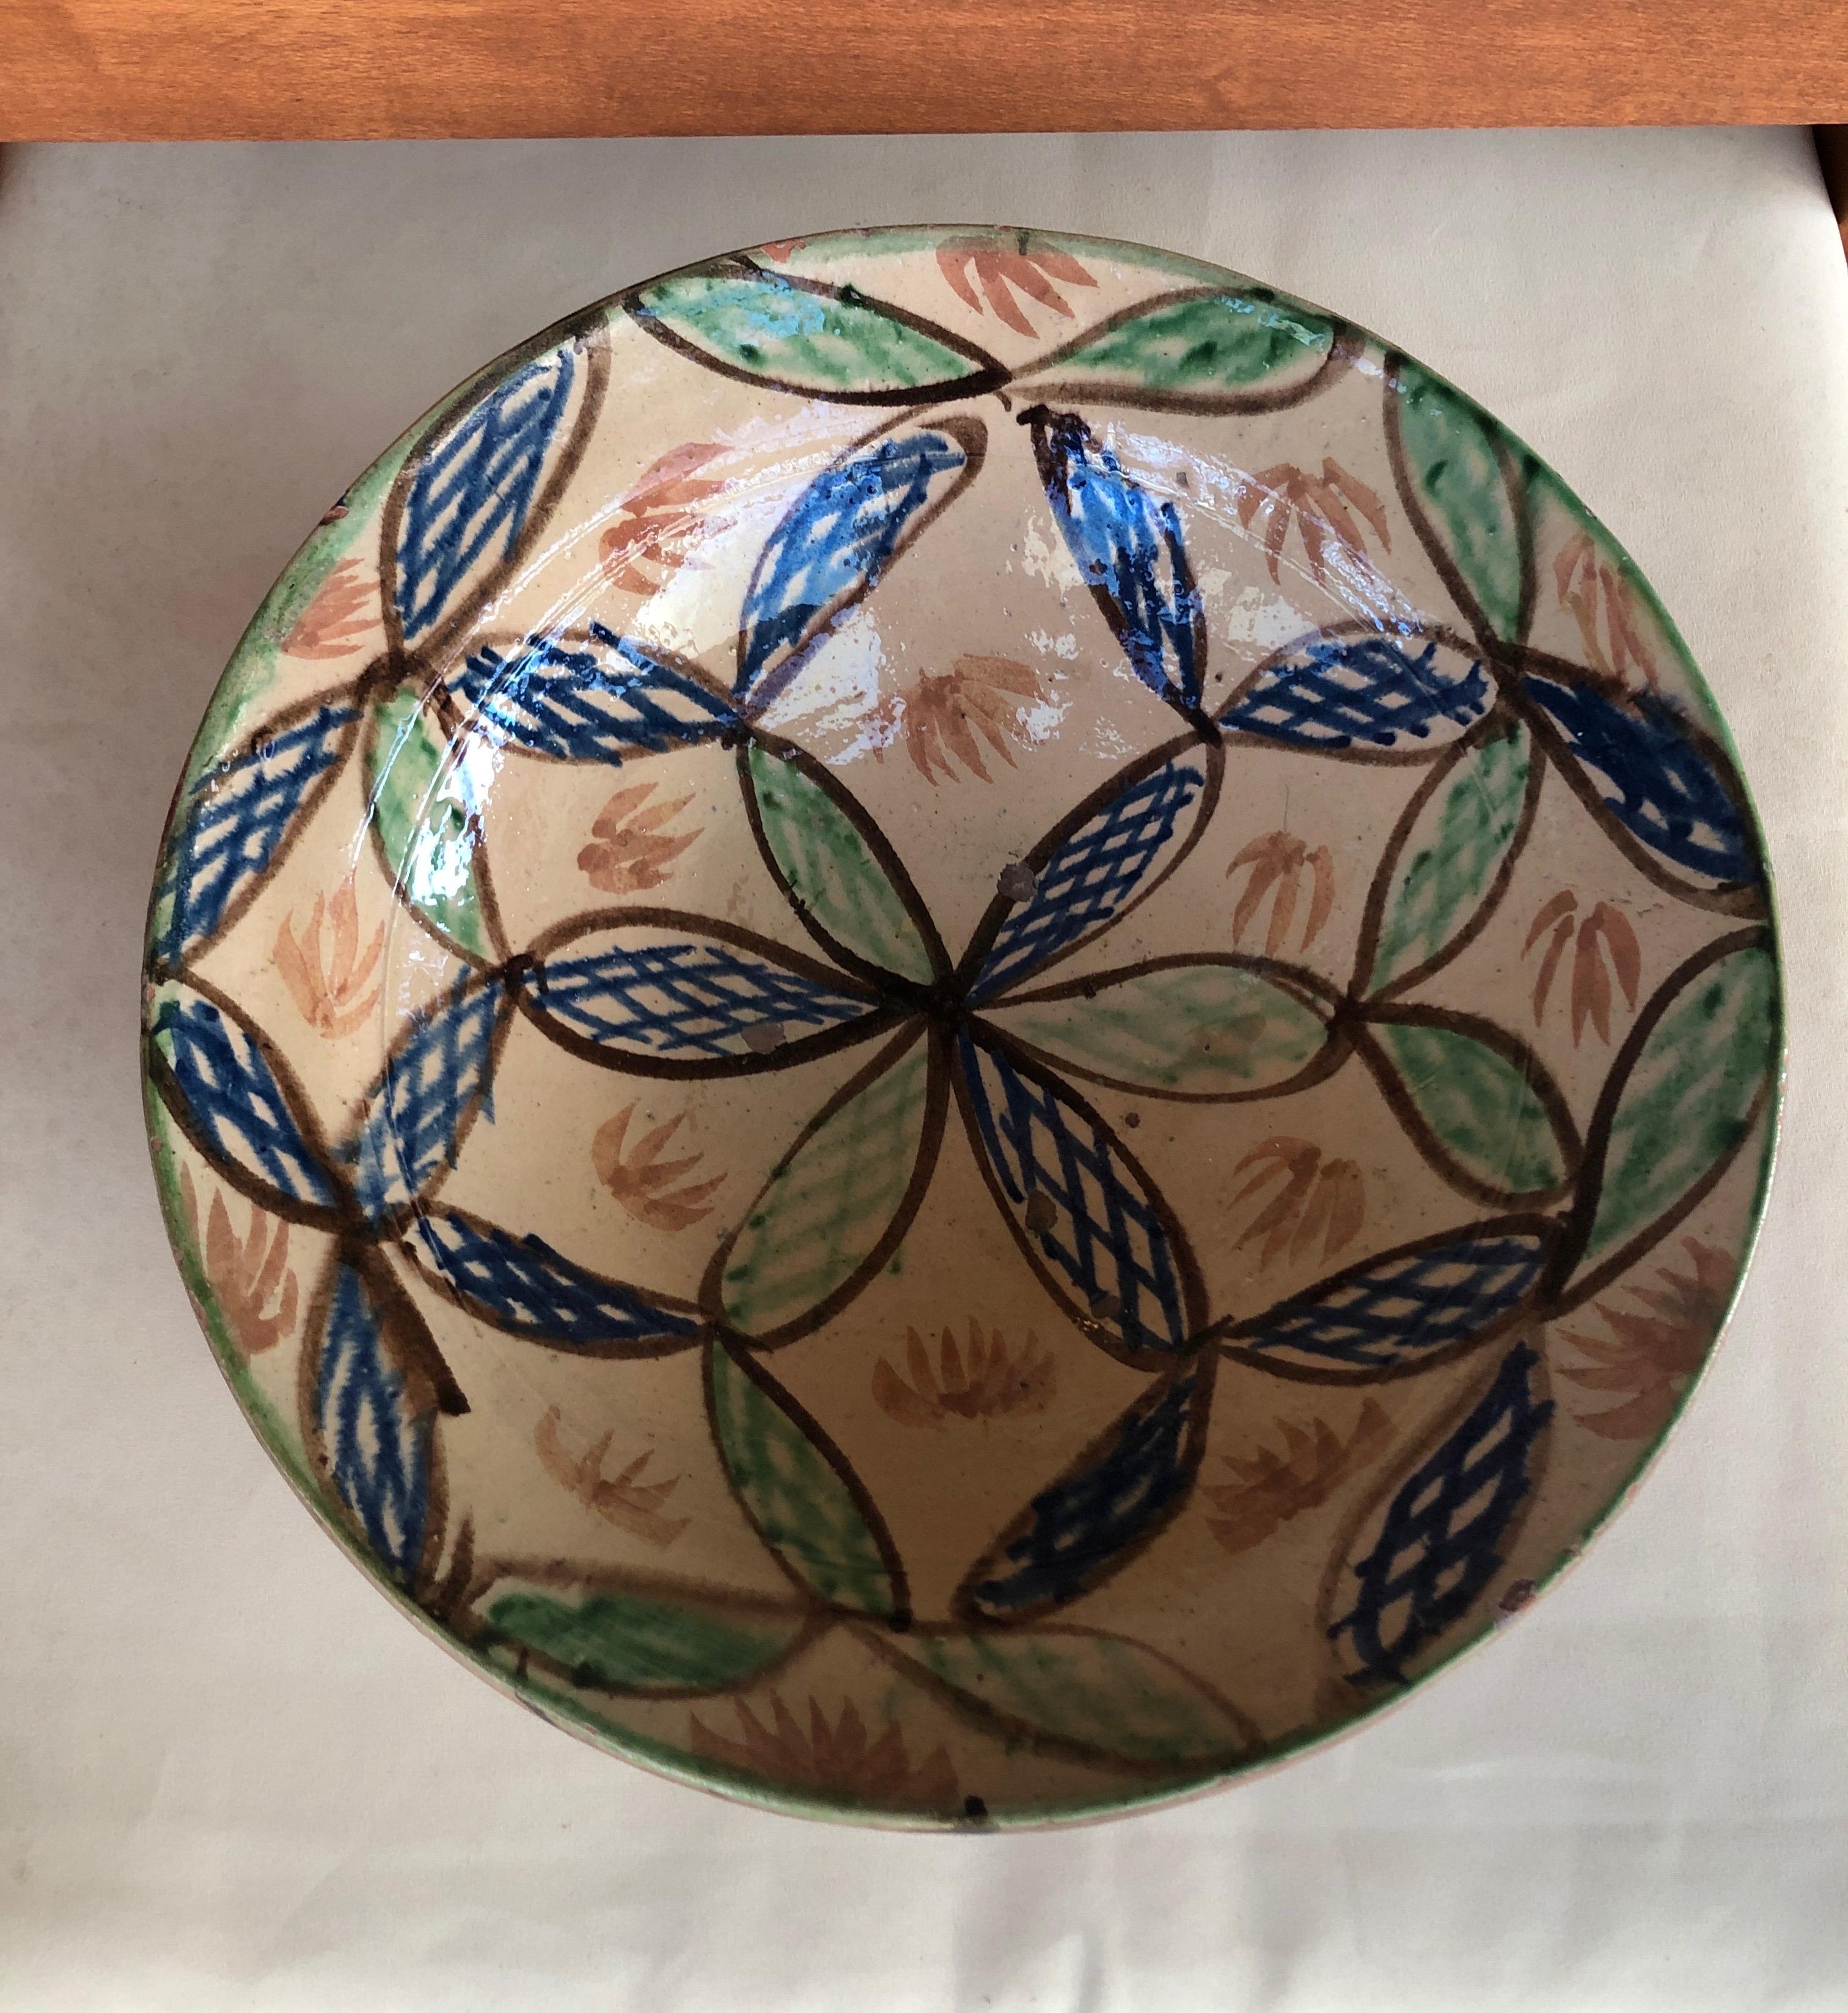 Hand Painted vintage green and blue large decorative bowl.
Size: 13.5